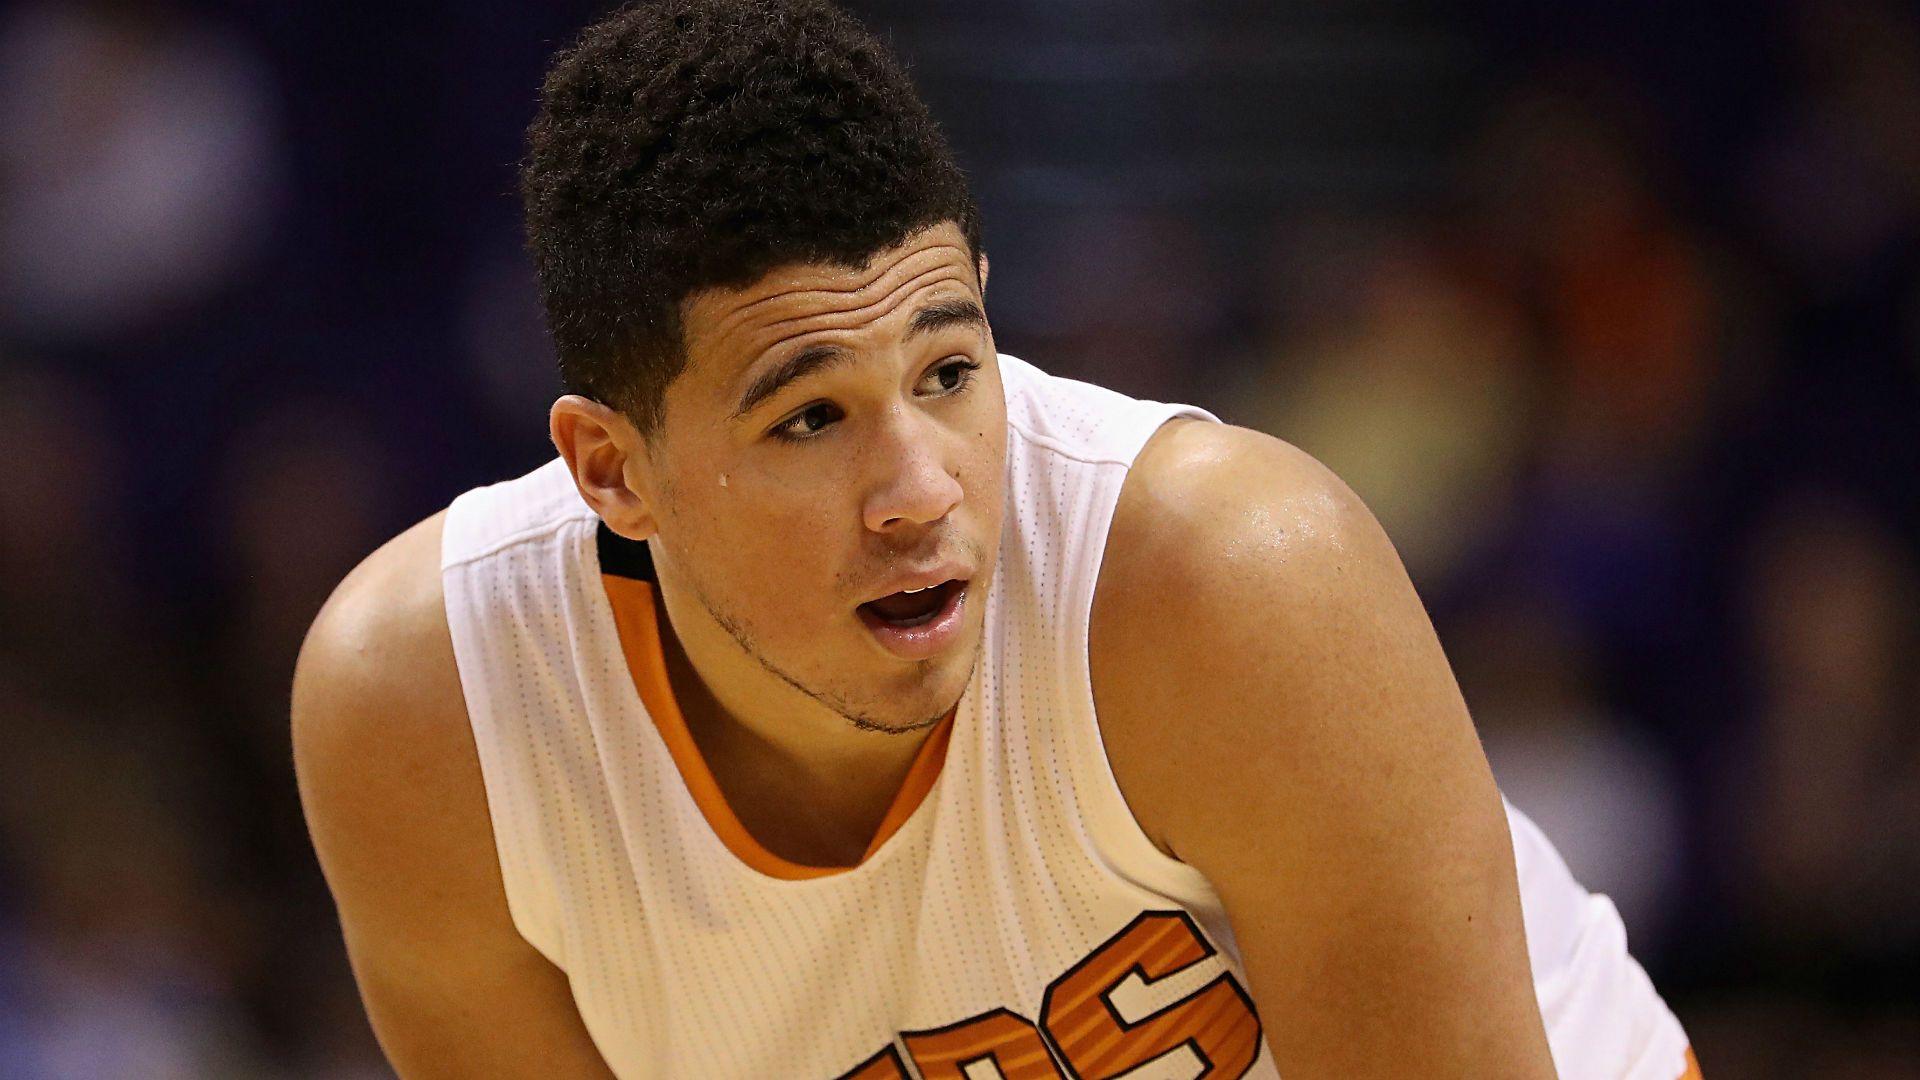 NBA Highlight of the Night: Devin Booker will not go on YOUR